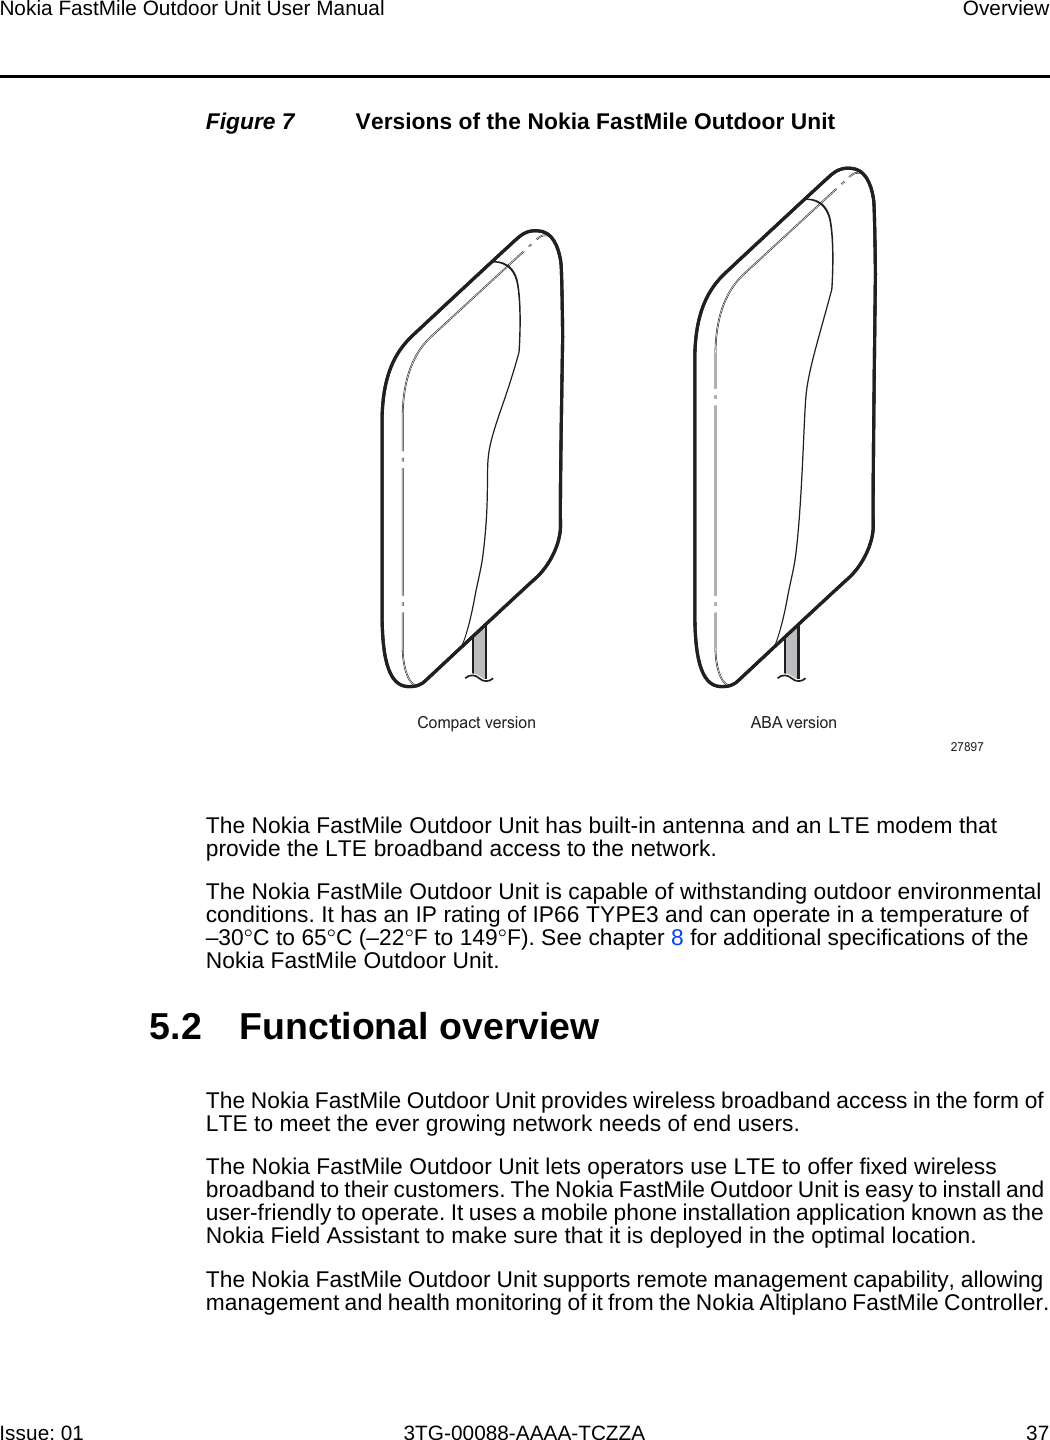 Nokia FastMile Outdoor Unit User Manual OverviewIssue: 01 3TG-00088-AAAA-TCZZA 37Figure 7 Versions of the Nokia FastMile Outdoor UnitThe Nokia FastMile Outdoor Unit has built-in antenna and an LTE modem that provide the LTE broadband access to the network. The Nokia FastMile Outdoor Unit is capable of withstanding outdoor environmental conditions. It has an IP rating of IP66 TYPE3 and can operate in a temperature of –30°C to 65°C (–22°F to 149°F). See chapter 8 for additional specifications of theNokia FastMile Outdoor Unit.5.2 Functional overviewThe Nokia FastMile Outdoor Unit provides wireless broadband access in the form of LTE to meet the ever growing network needs of end users.The Nokia FastMile Outdoor Unit lets operators use LTE to offer fixed wireless broadband to their customers. The Nokia FastMile Outdoor Unit is easy to install and user-friendly to operate. It uses a mobile phone installation application known as the Nokia Field Assistant to make sure that it is deployed in the optimal location.The Nokia FastMile Outdoor Unit supports remote management capability, allowing management and health monitoring of it from the Nokia Altiplano FastMile Controller.Compact version ABA version27897